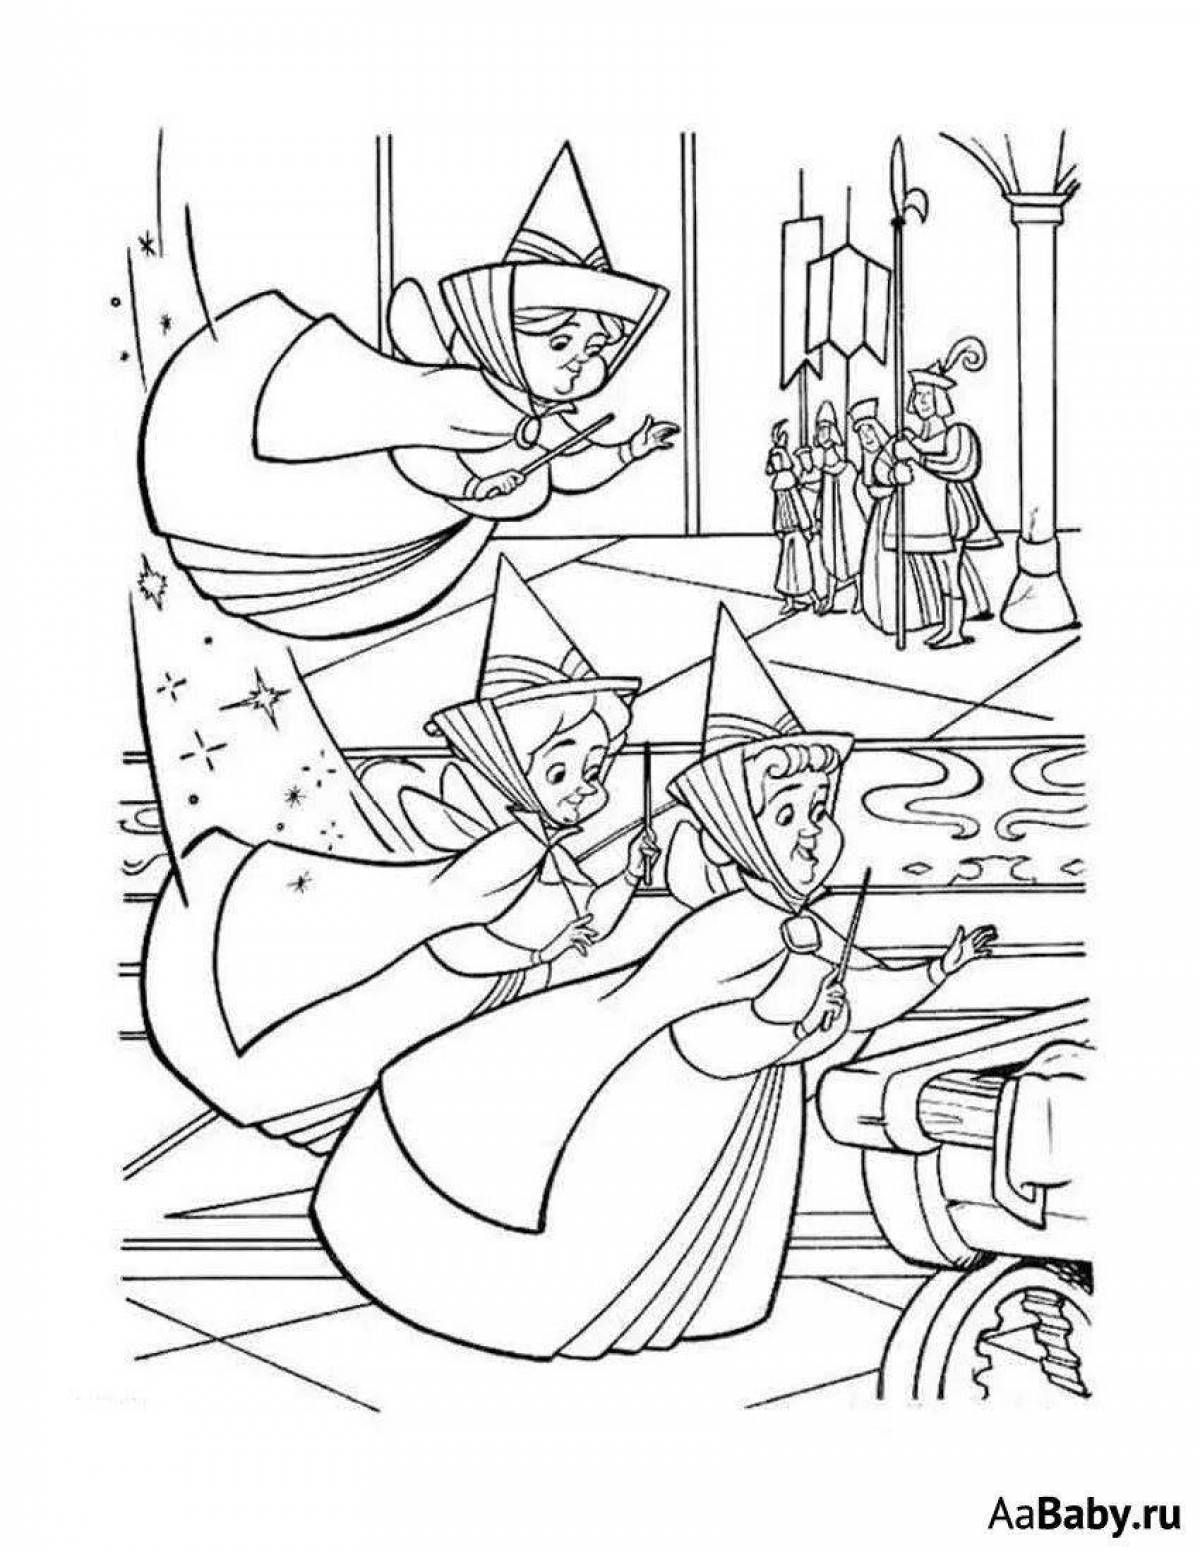 Coloring book sleeping princess from a fairy tale